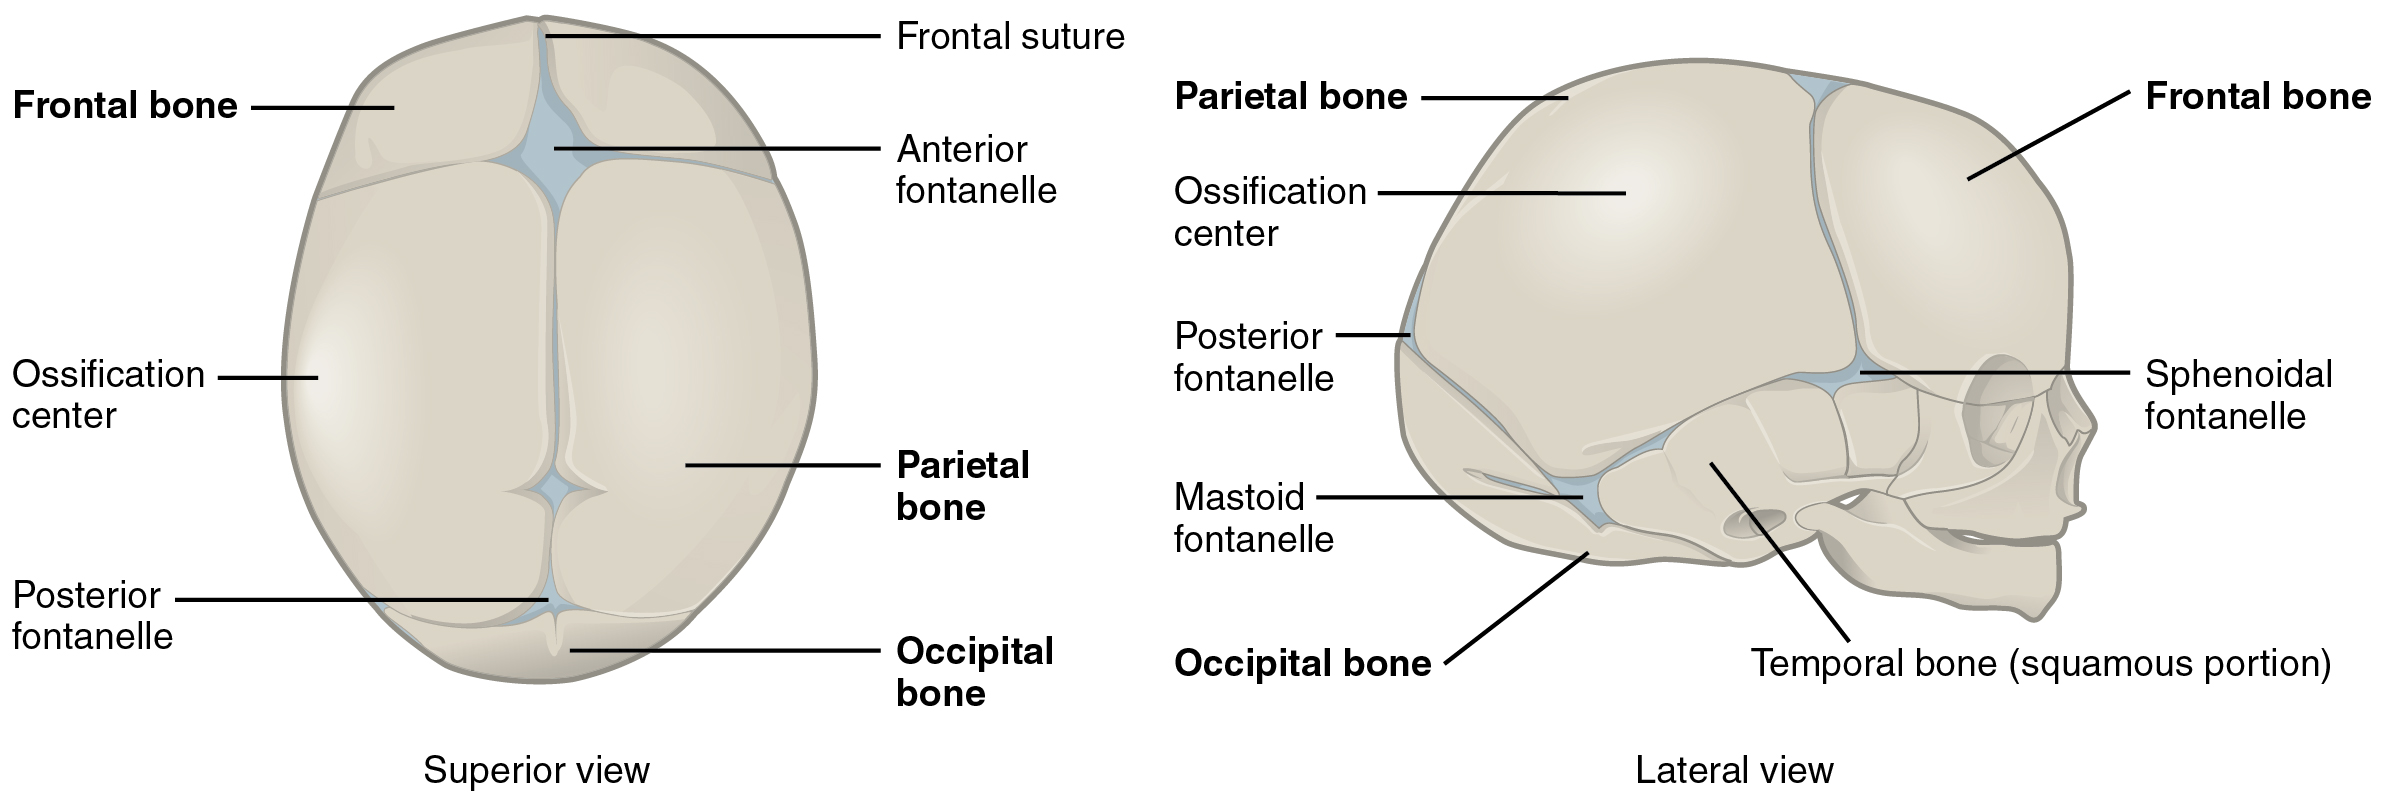 sutures of the fetal skull